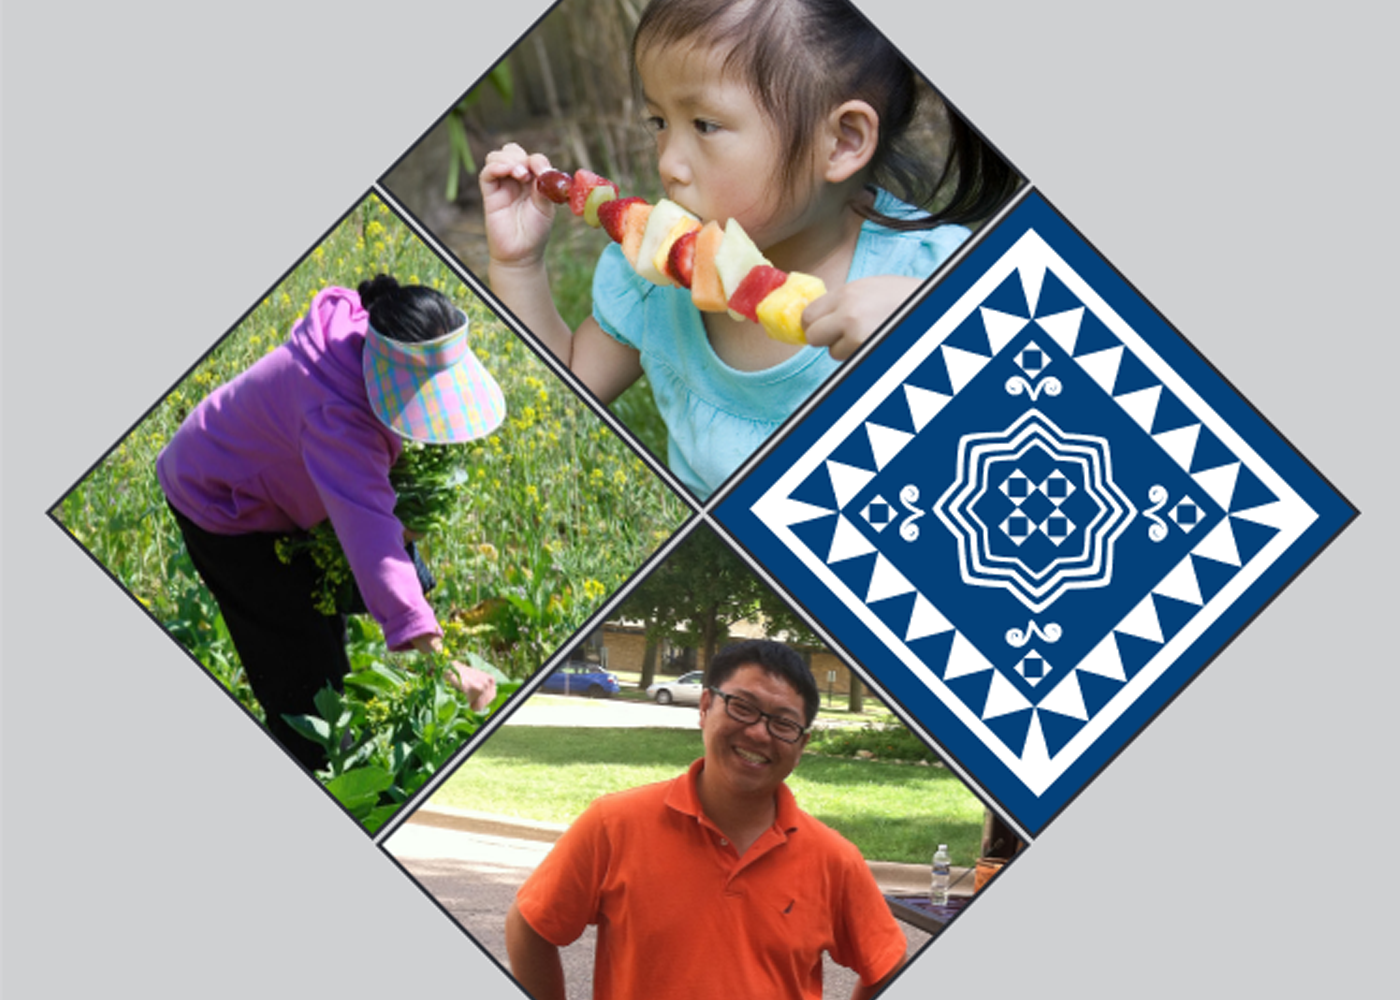 Collage of photos of a young girl eating a fruit kabob, a woman picking flowers in a field, a man smiling, and a geometric design.